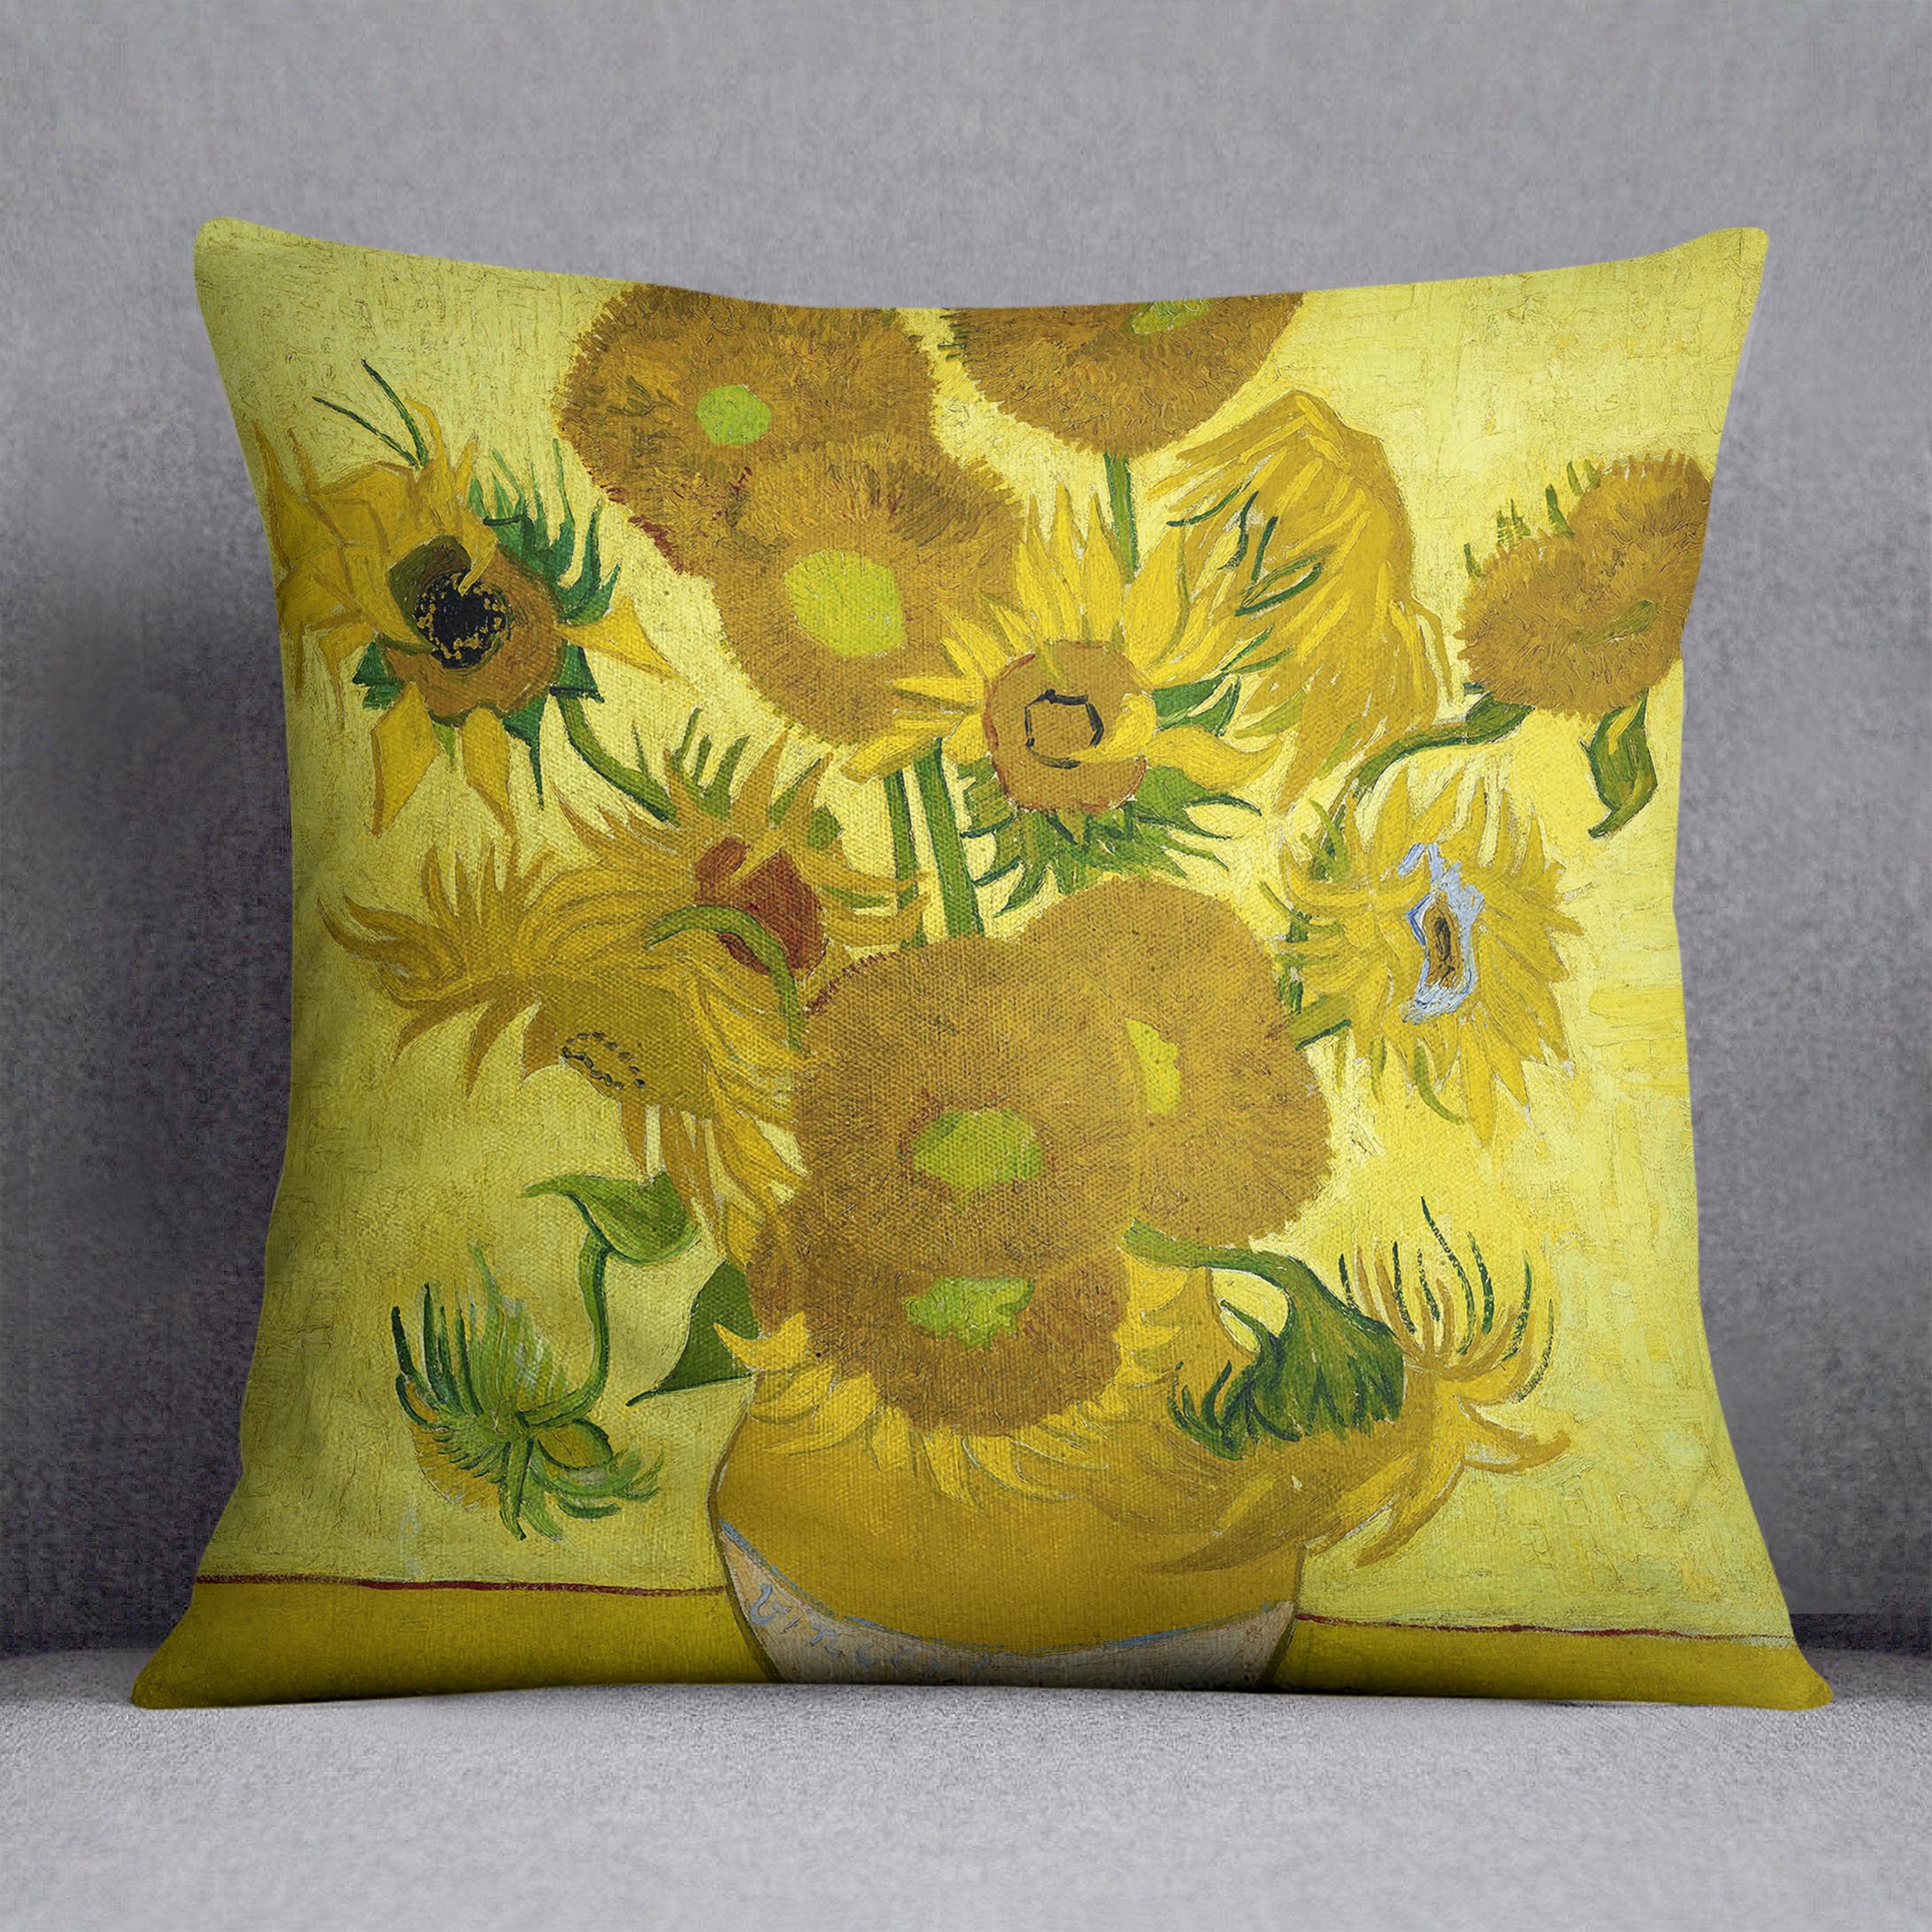 Another vase of sunflowers Cushion